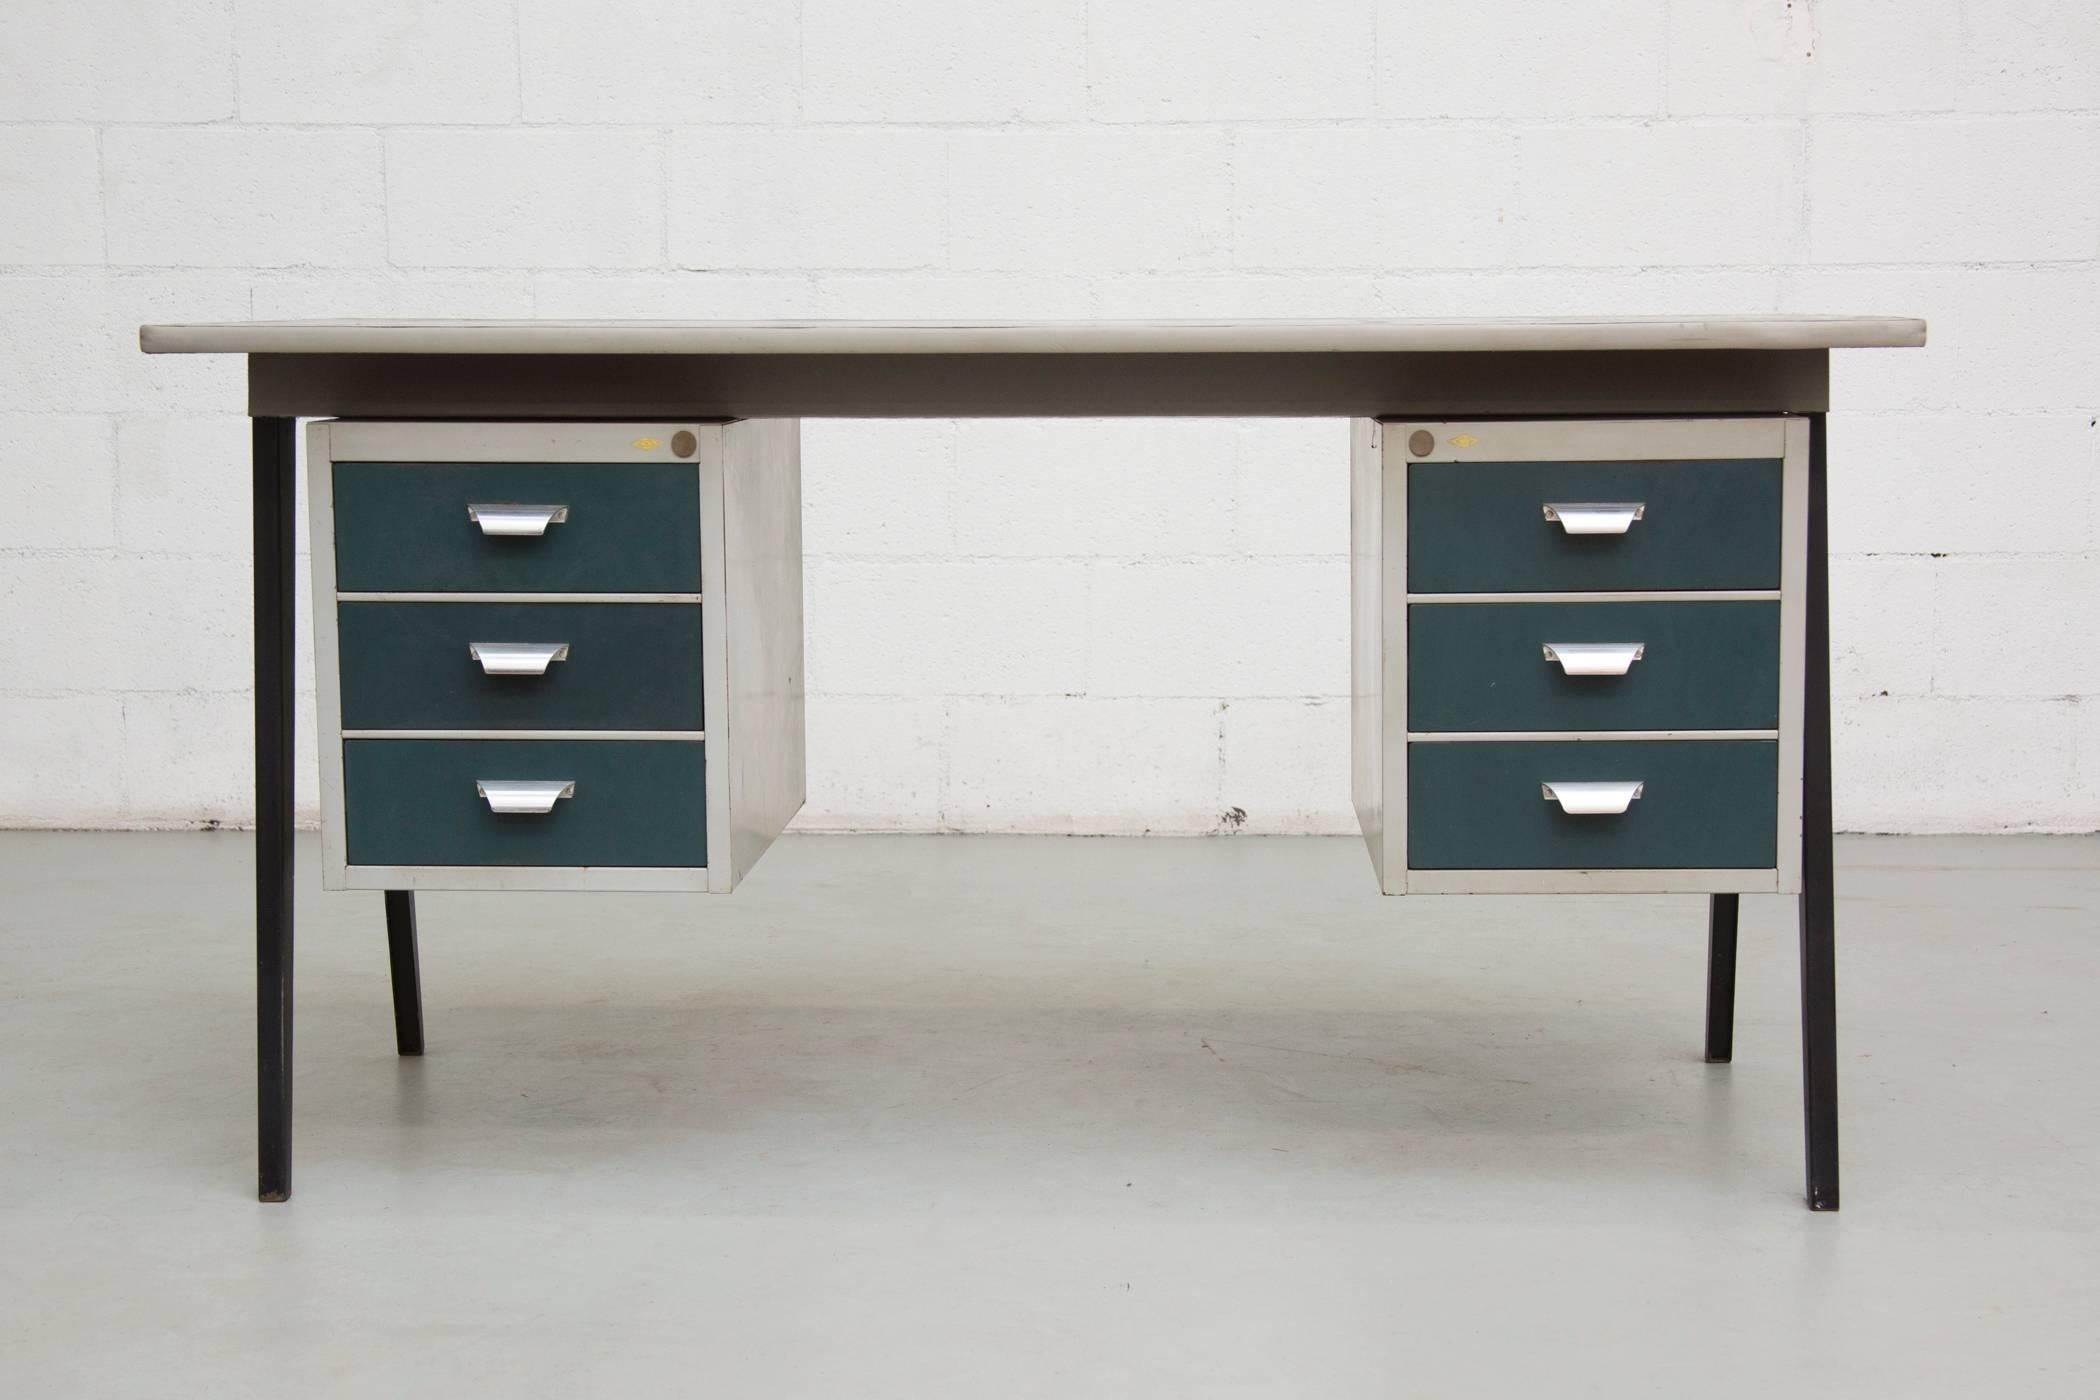 Perfect Prouve style legs hold the black linoleum top with two sets of stacking drawers all in enameled metal. Original condition with visible wear consistent with its age and usage.